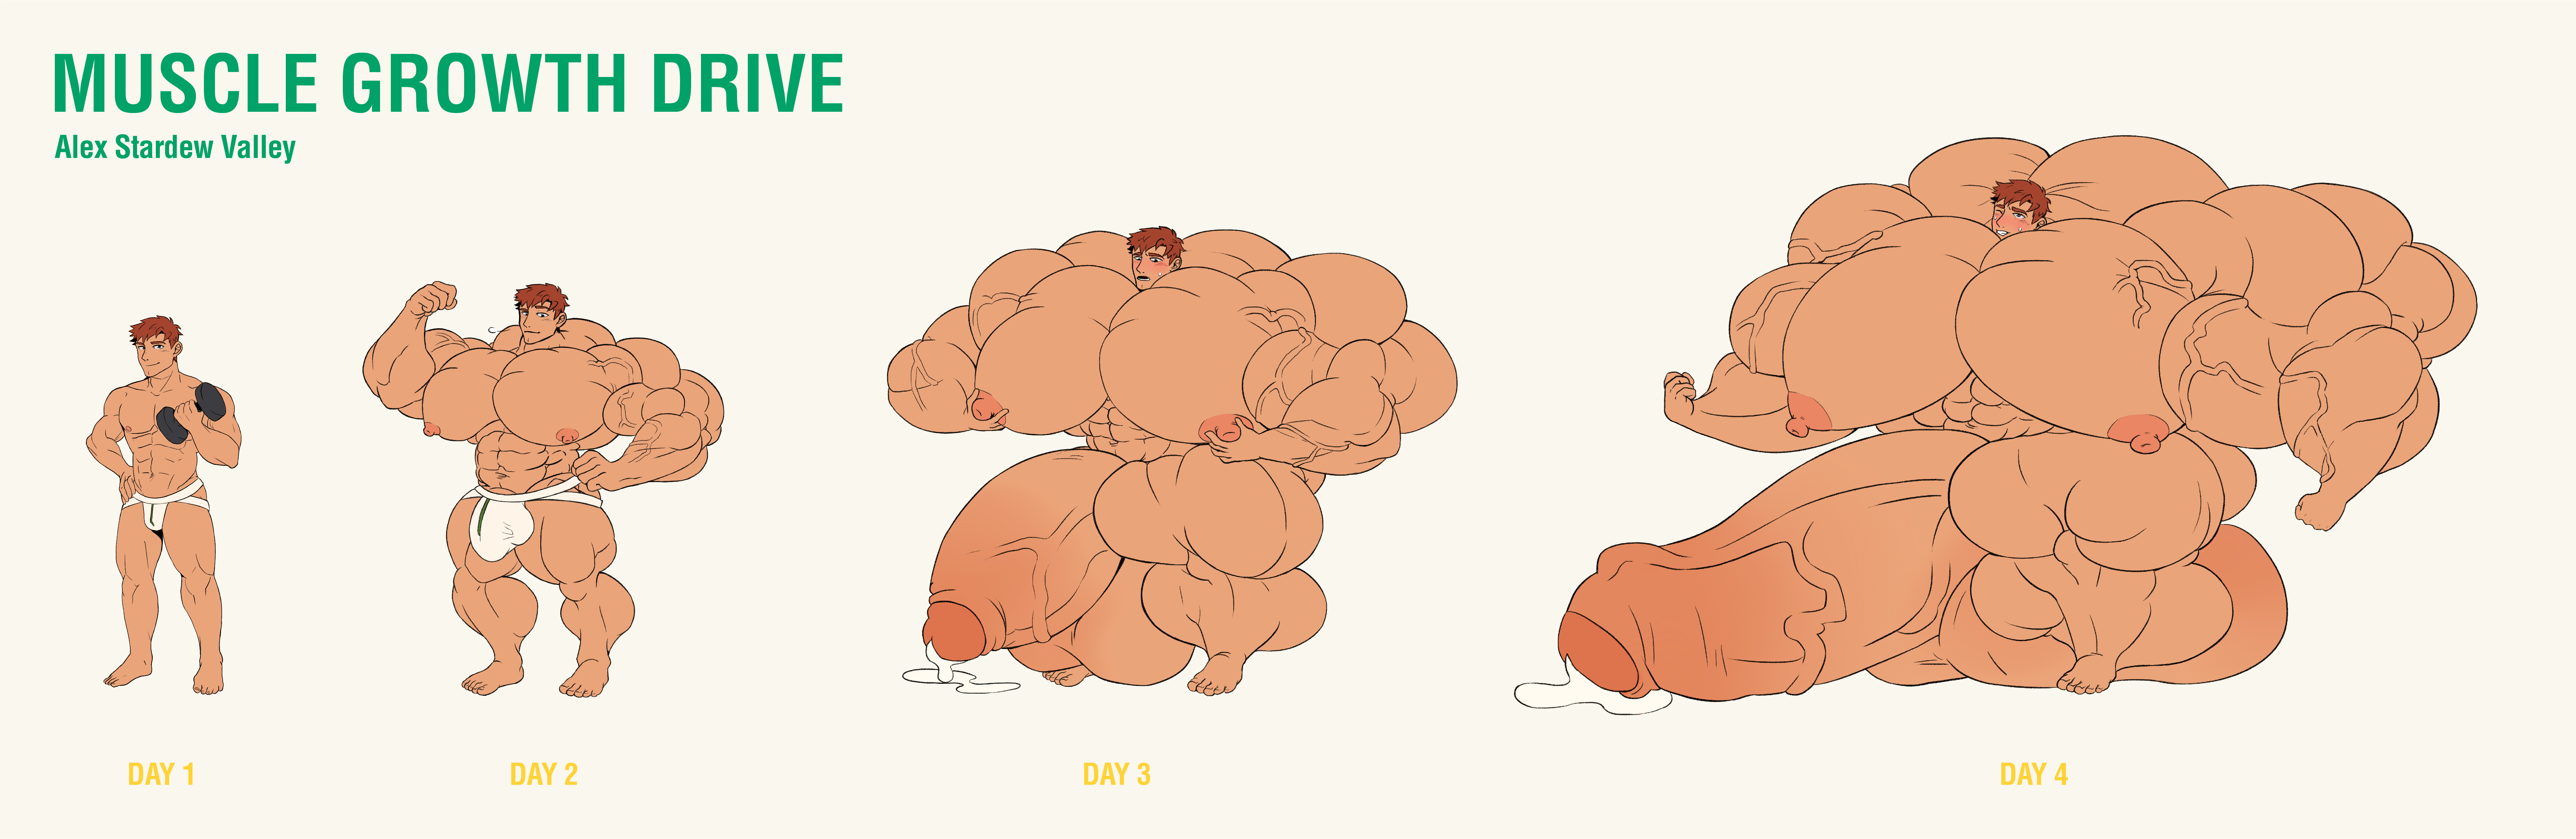 Growing Muscles Sequence.